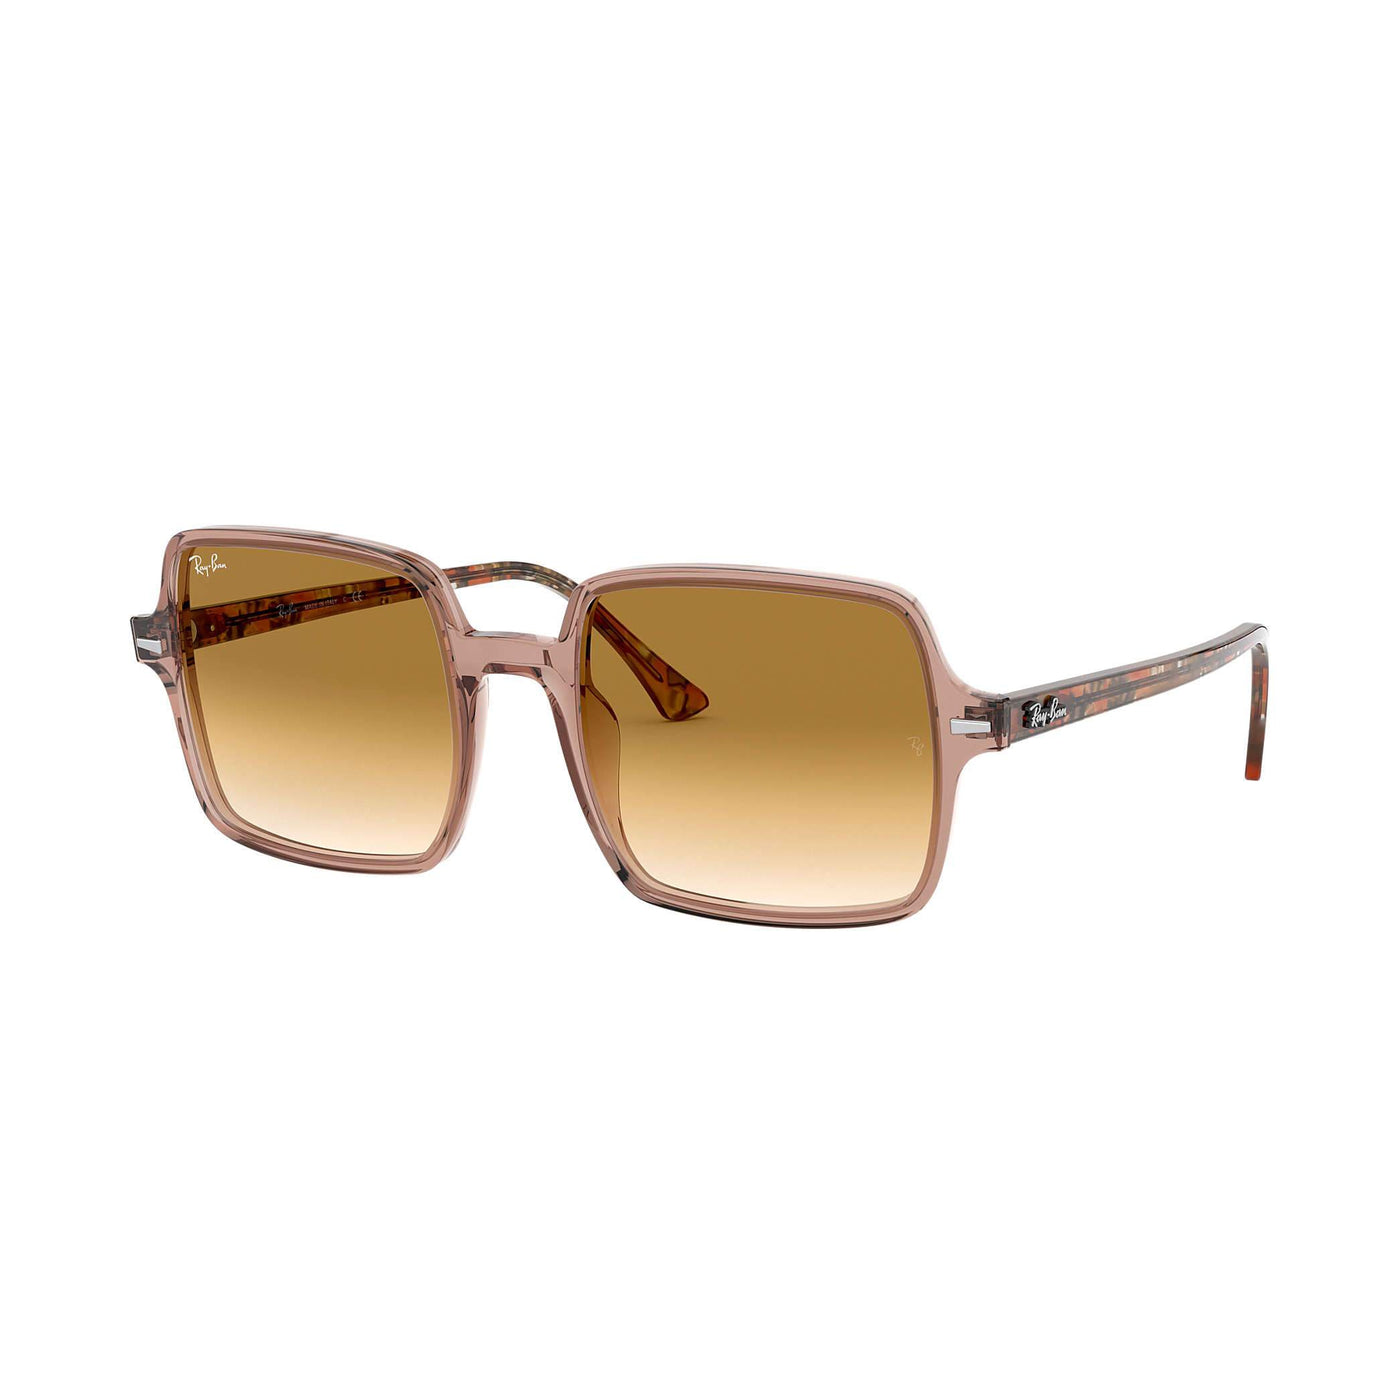 Ray Ban Square II Sunglasses-SUNGLASSES-Transparent Brown-Light Brown Gradient-Kevin's Fine Outdoor Gear & Apparel